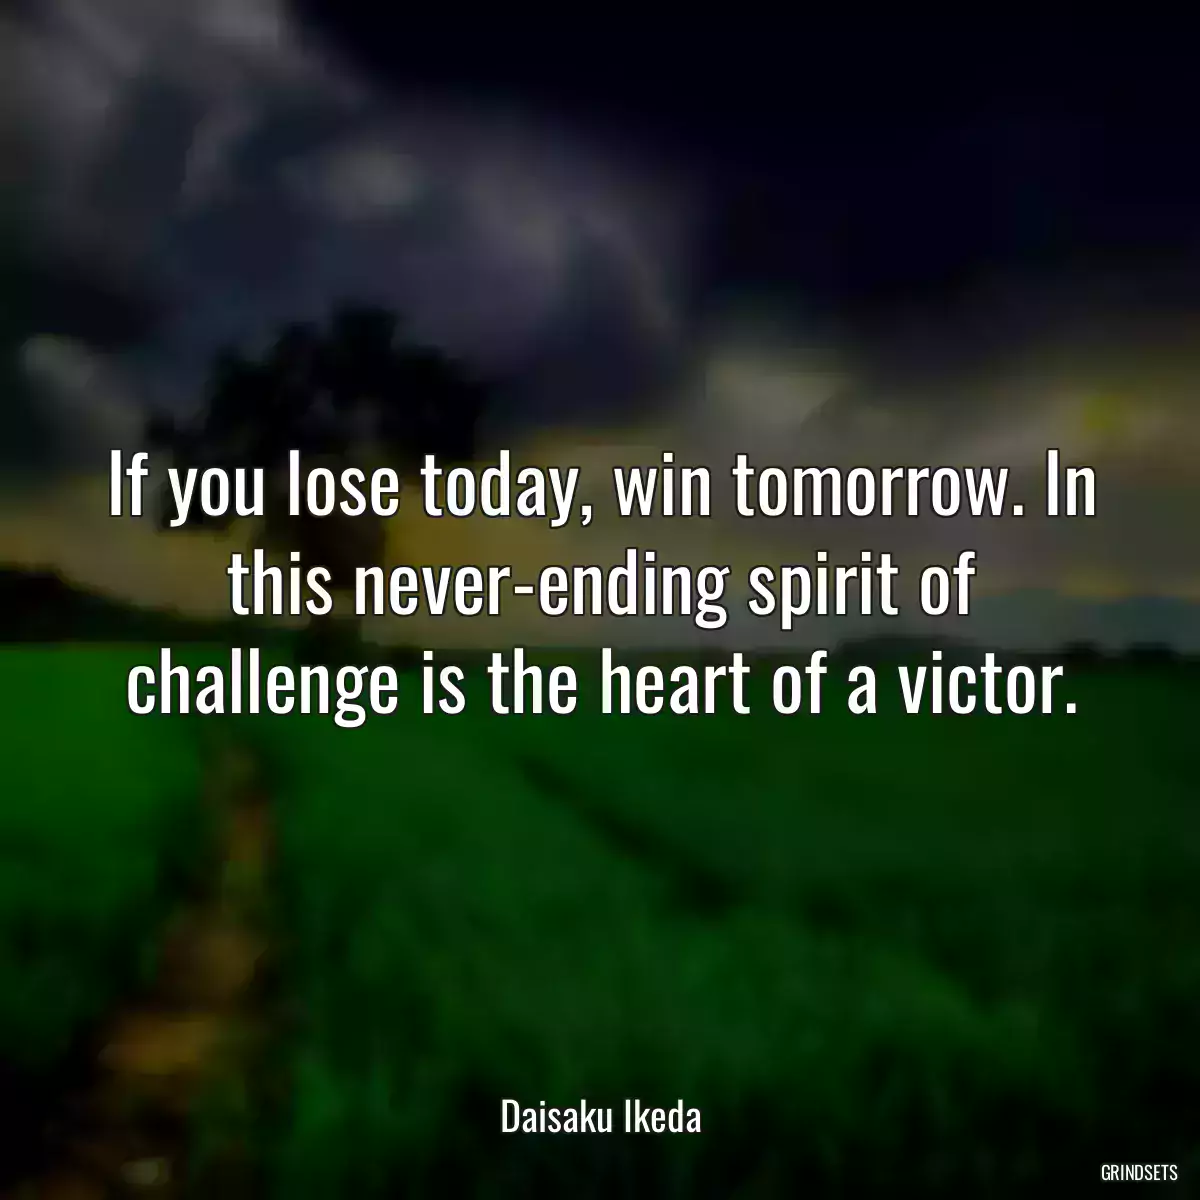 If you lose today, win tomorrow. In this never-ending spirit of challenge is the heart of a victor.